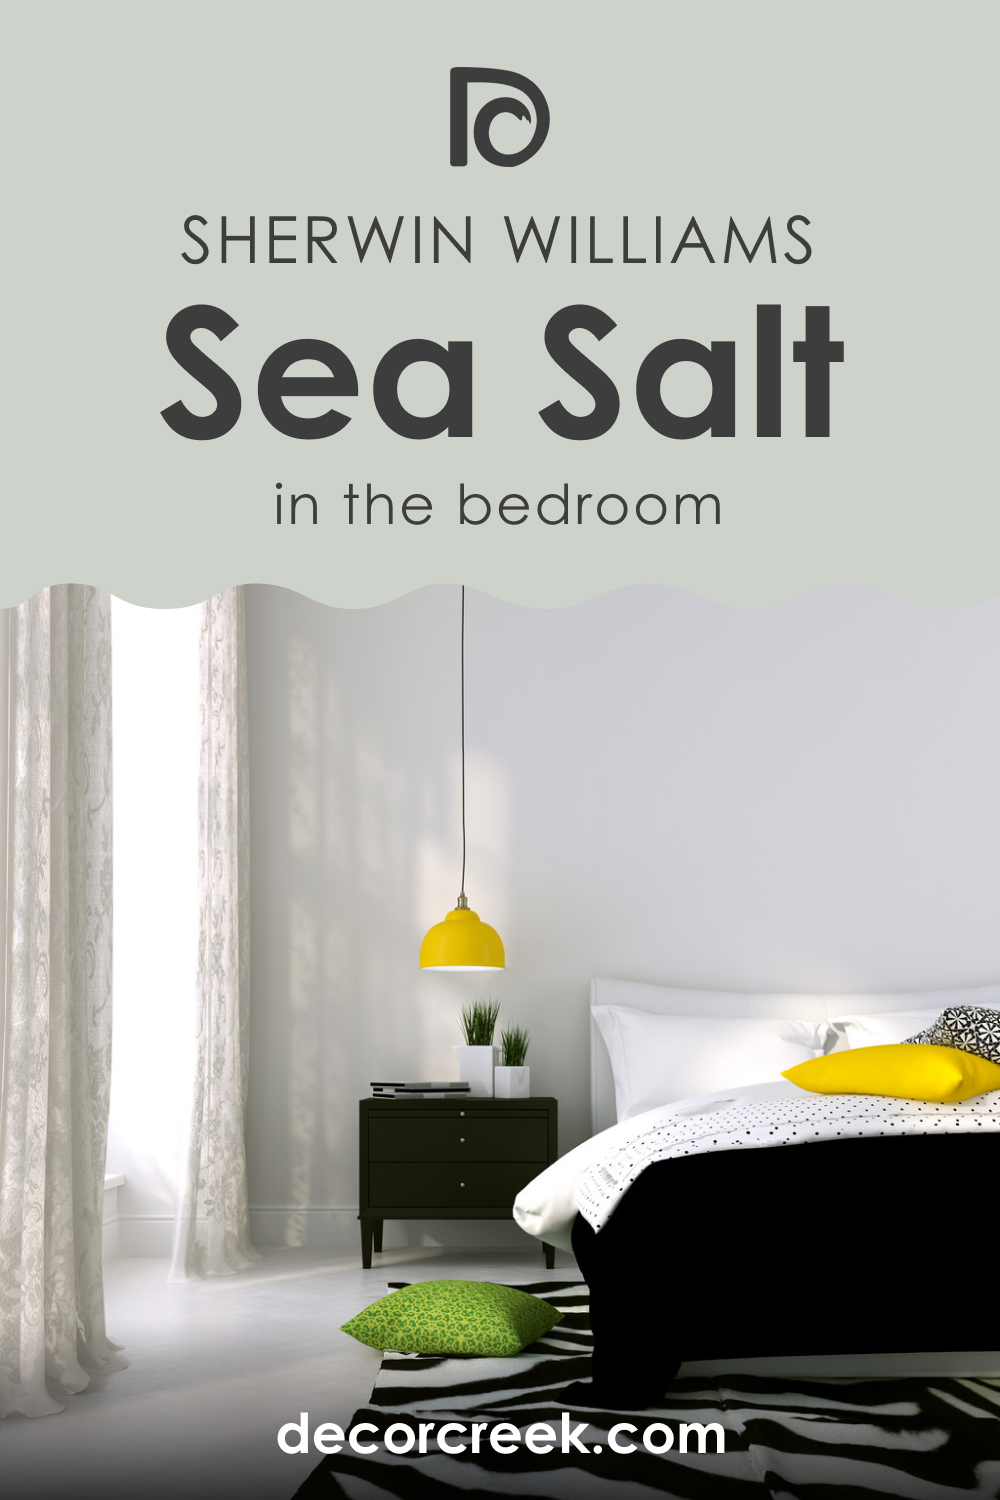 How to Use Sea Salt SW 6204 in the Bedroom?